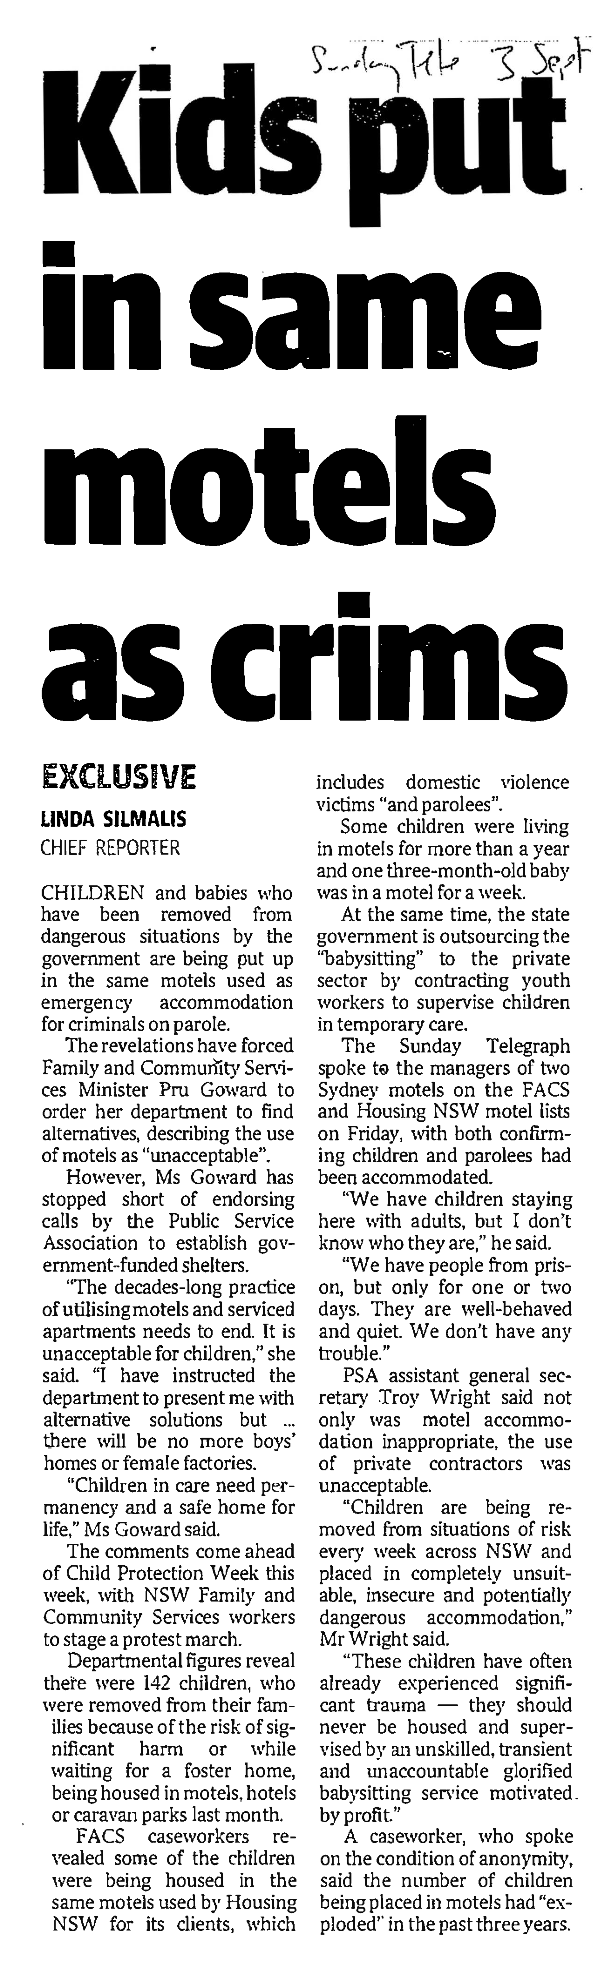 Kids put in same motels as crims - The Sunday Tele 3 September 2017 small